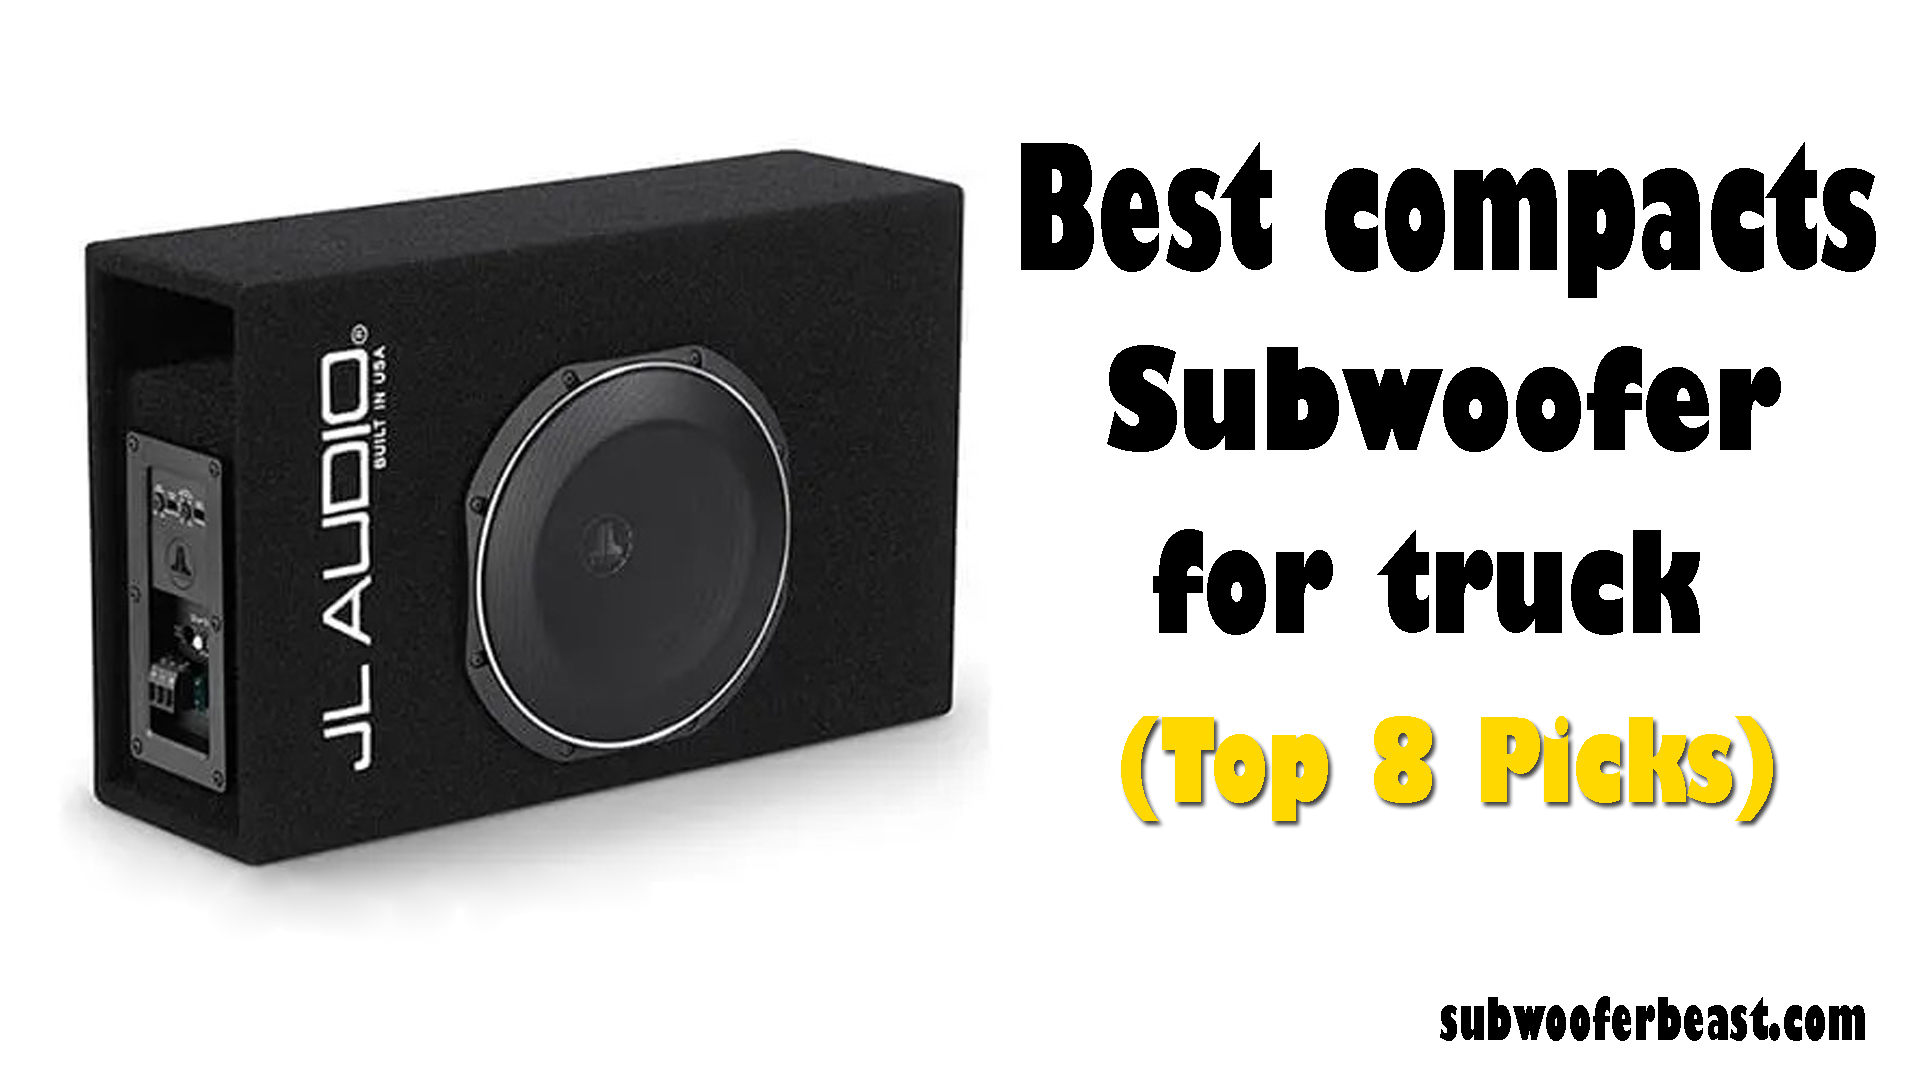 Best compact subwoofer for truck (Top 8 Picks)